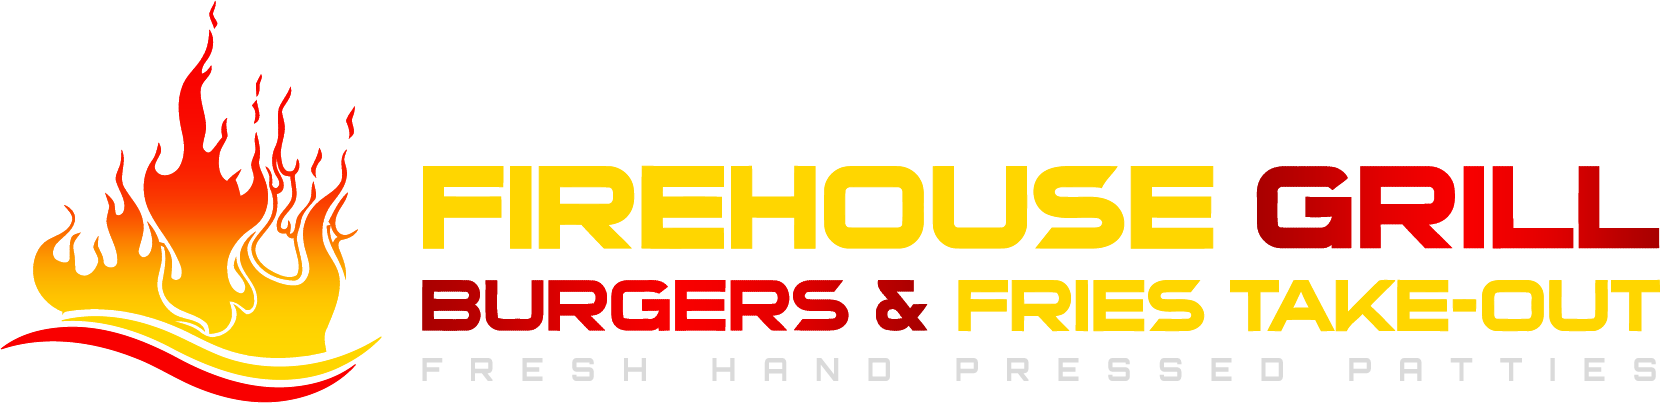 Firehouse Grill Home